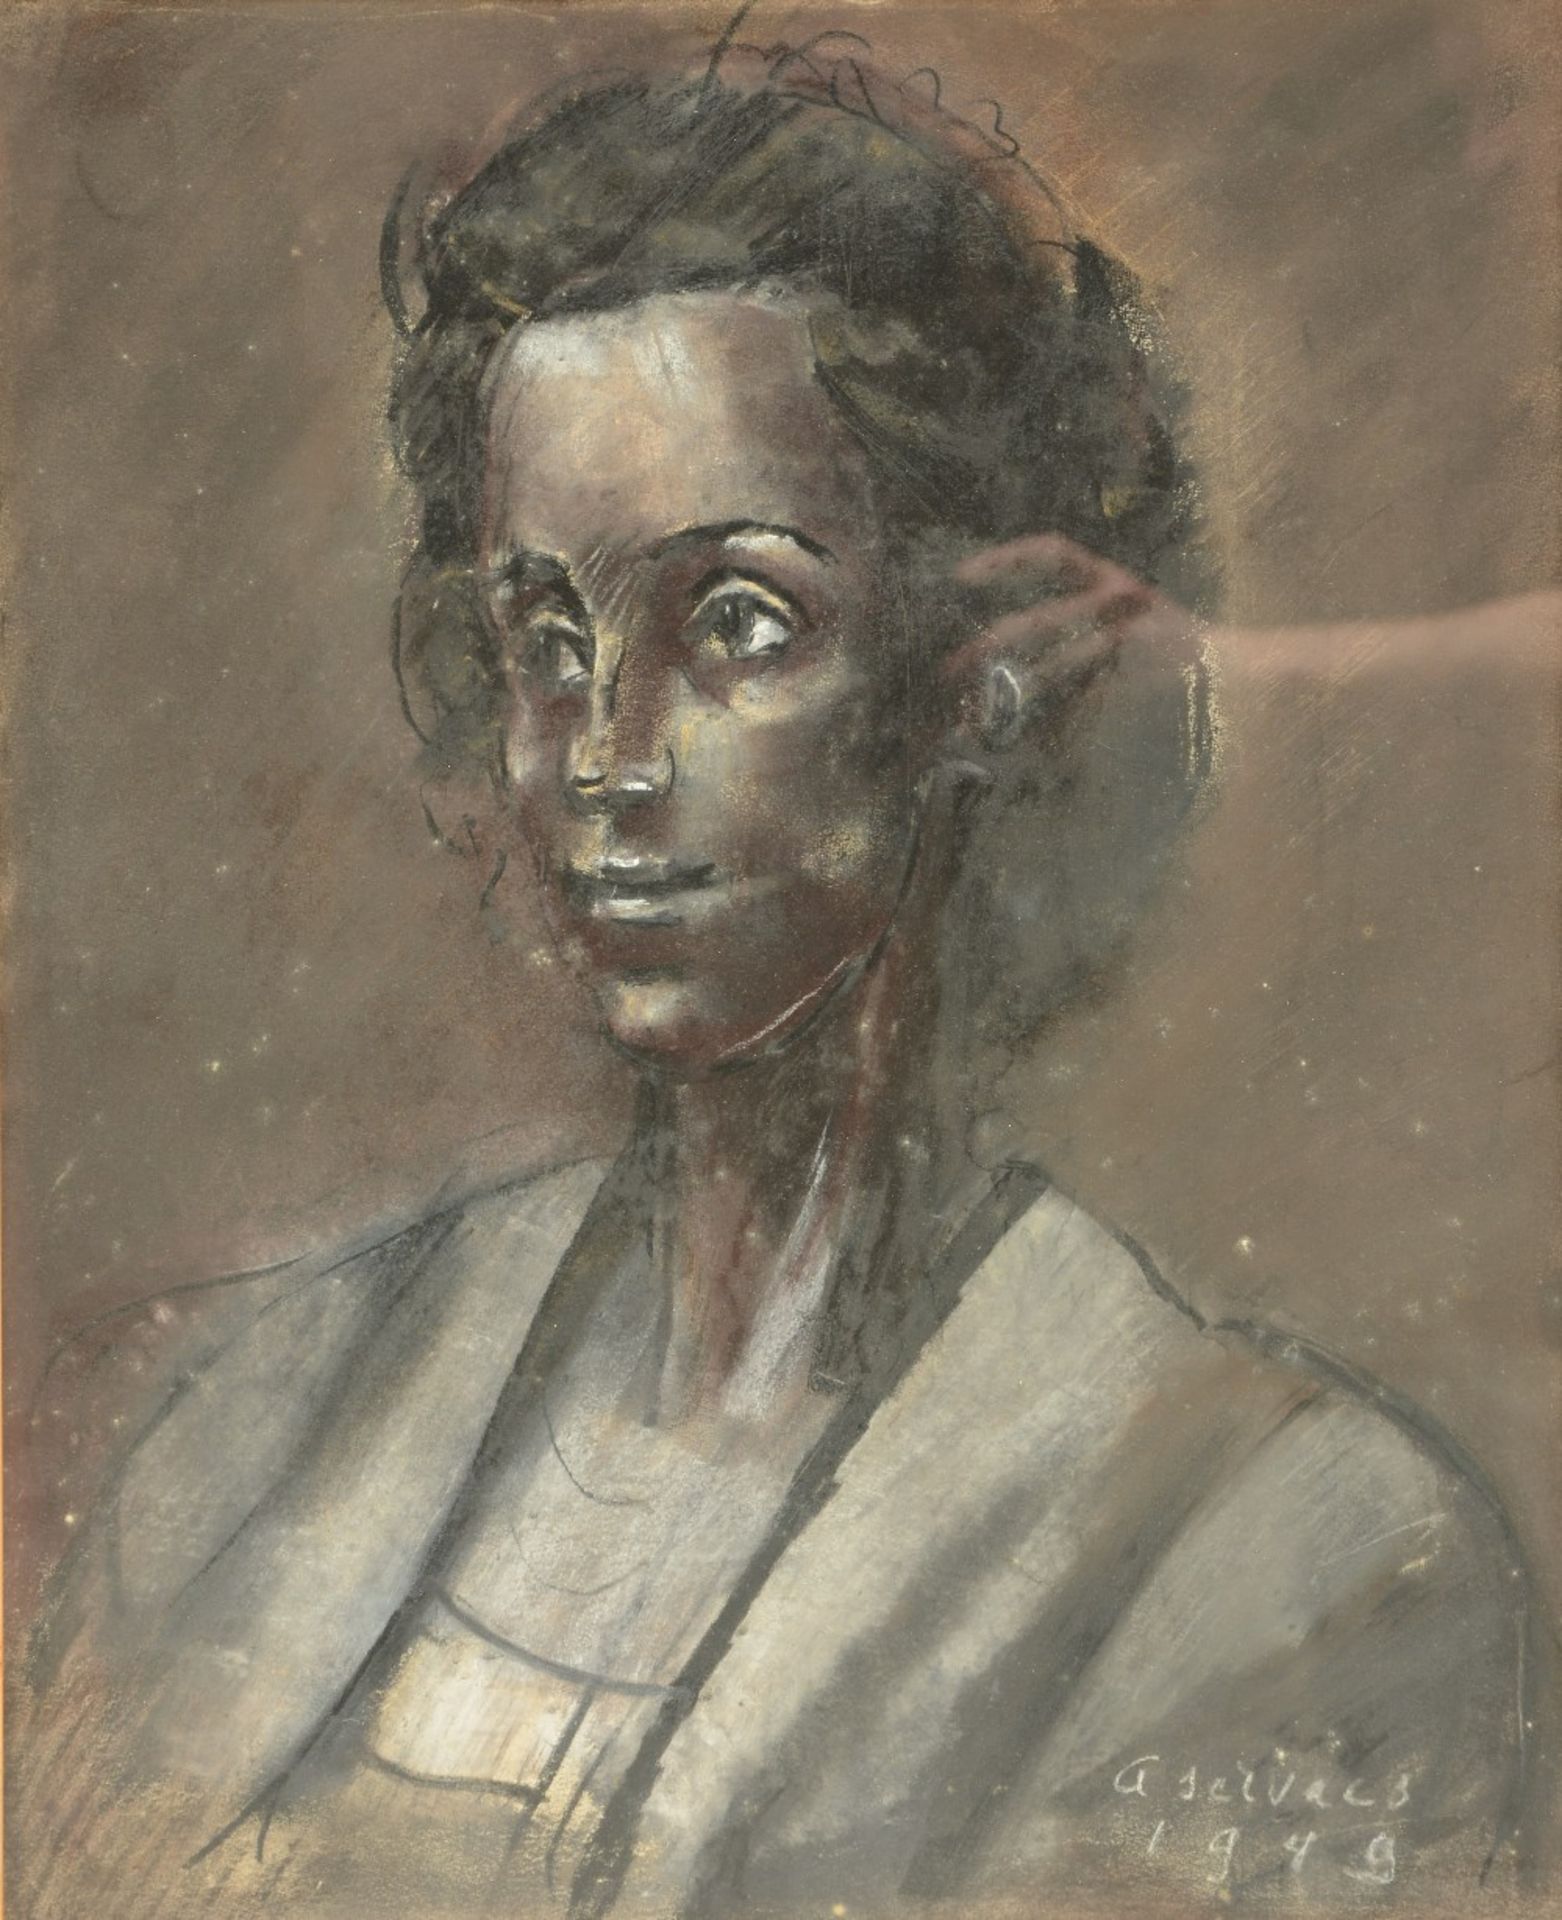 Servaes A., a womans portrait, charcoal + white and red crayon, dated 1949, 39 x 48 cm